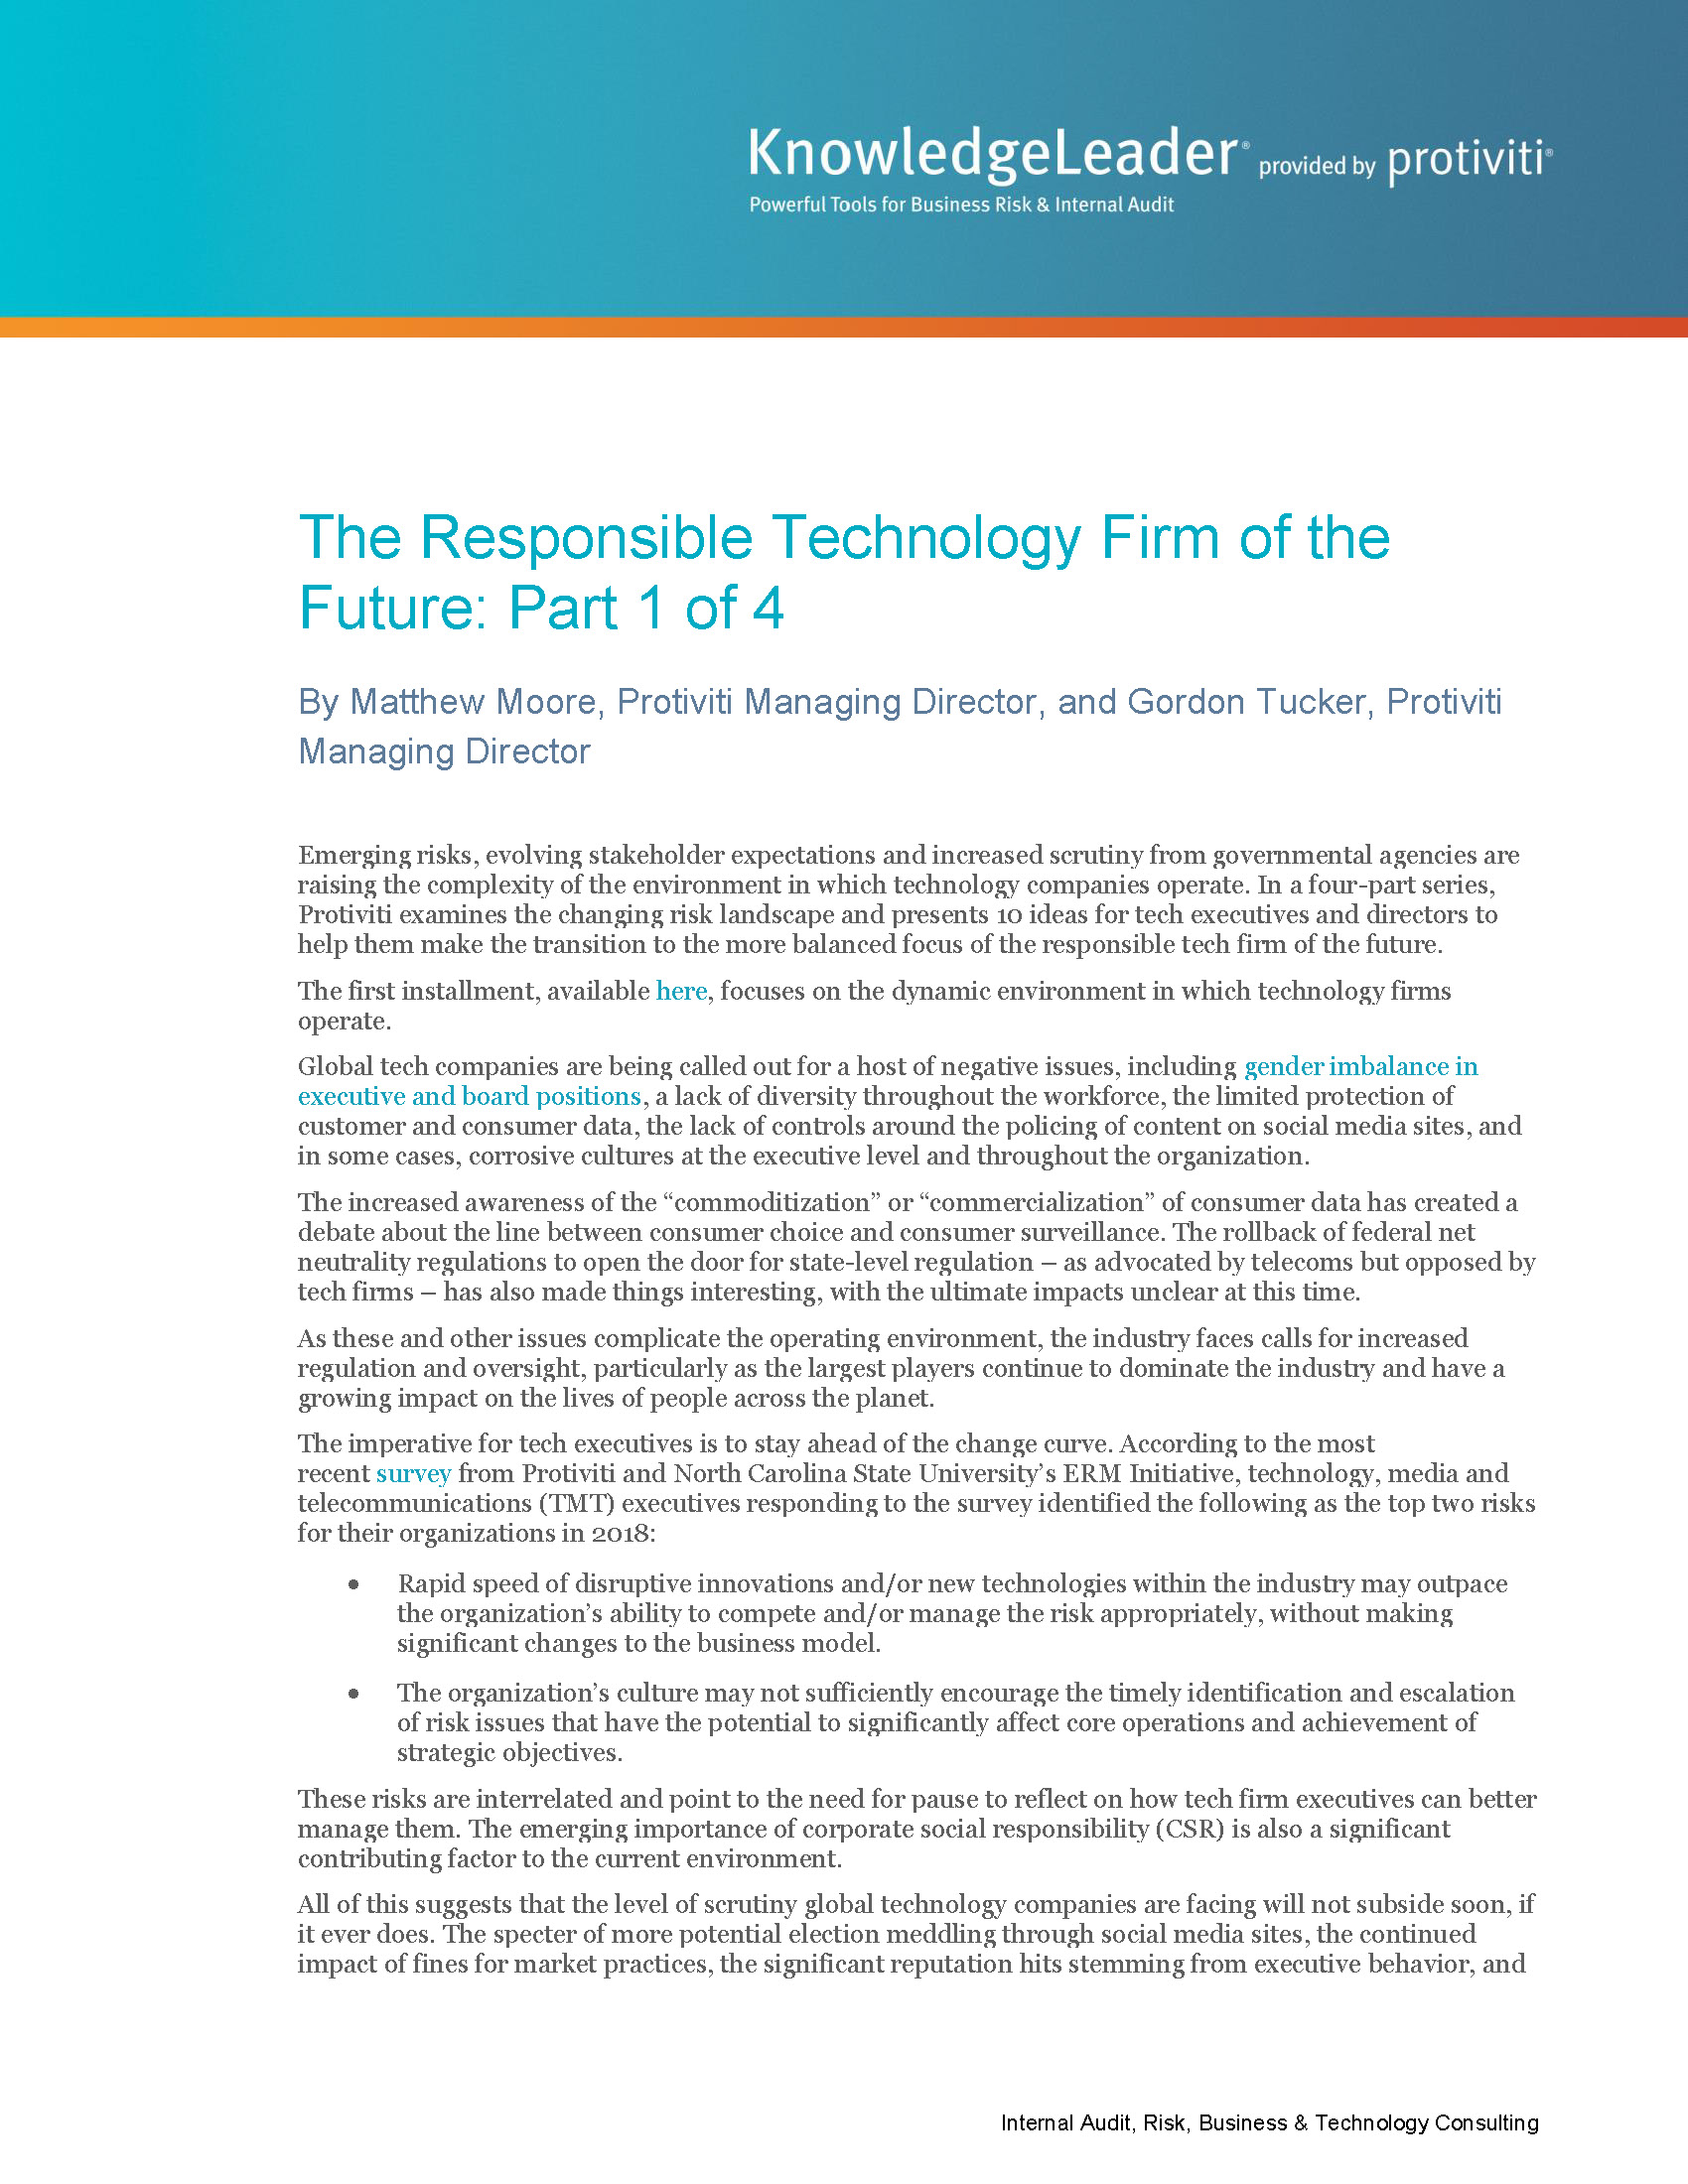 Screenshot of the first page of The Responsible Technology Firm of the Future Part 1 of 4